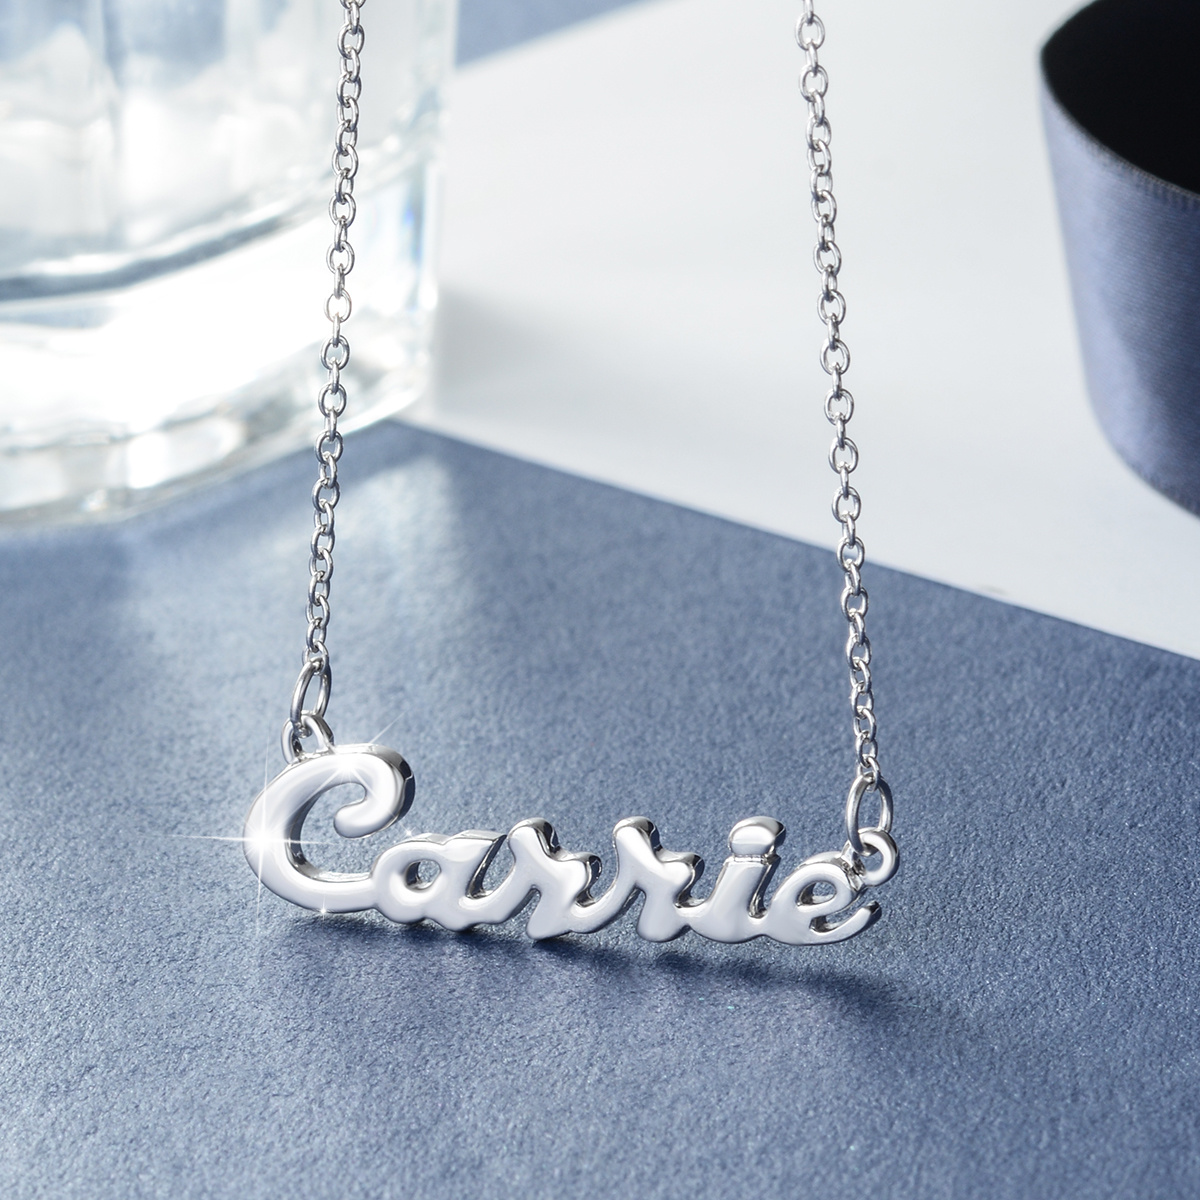 Wholesale Vendor Alphabet Letter Personalized Custom Jewelry 925 Sterling Silver Name Plate Necklace